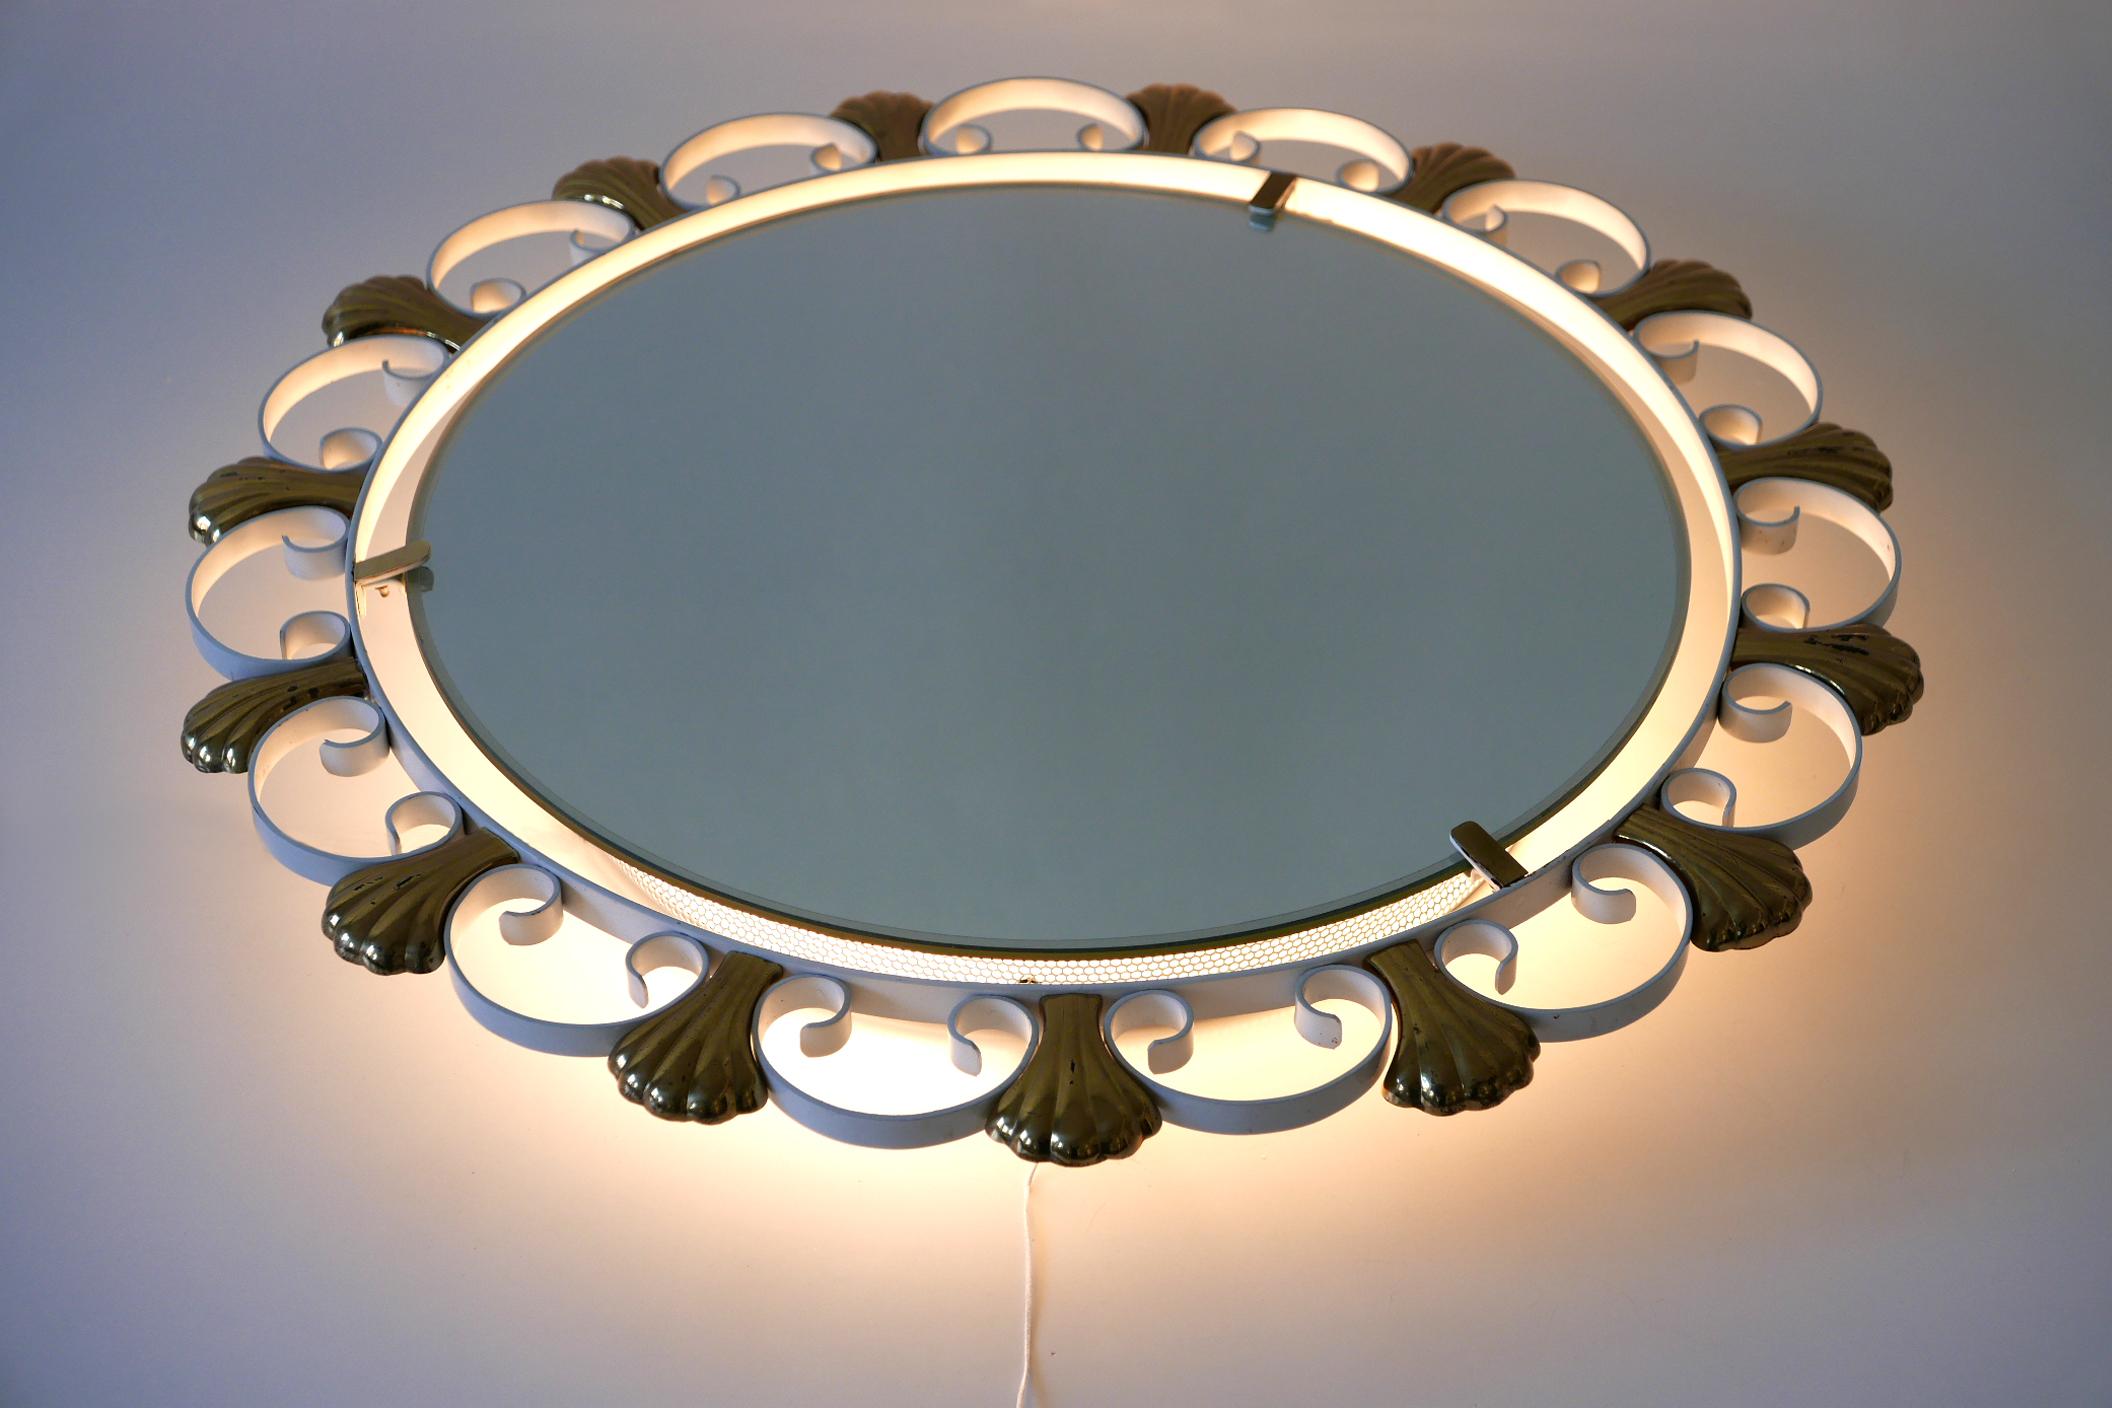 Elegant Mid-Century Modern Backlit Wall Mirror by Hillebrand, 1960s, Germany For Sale 9